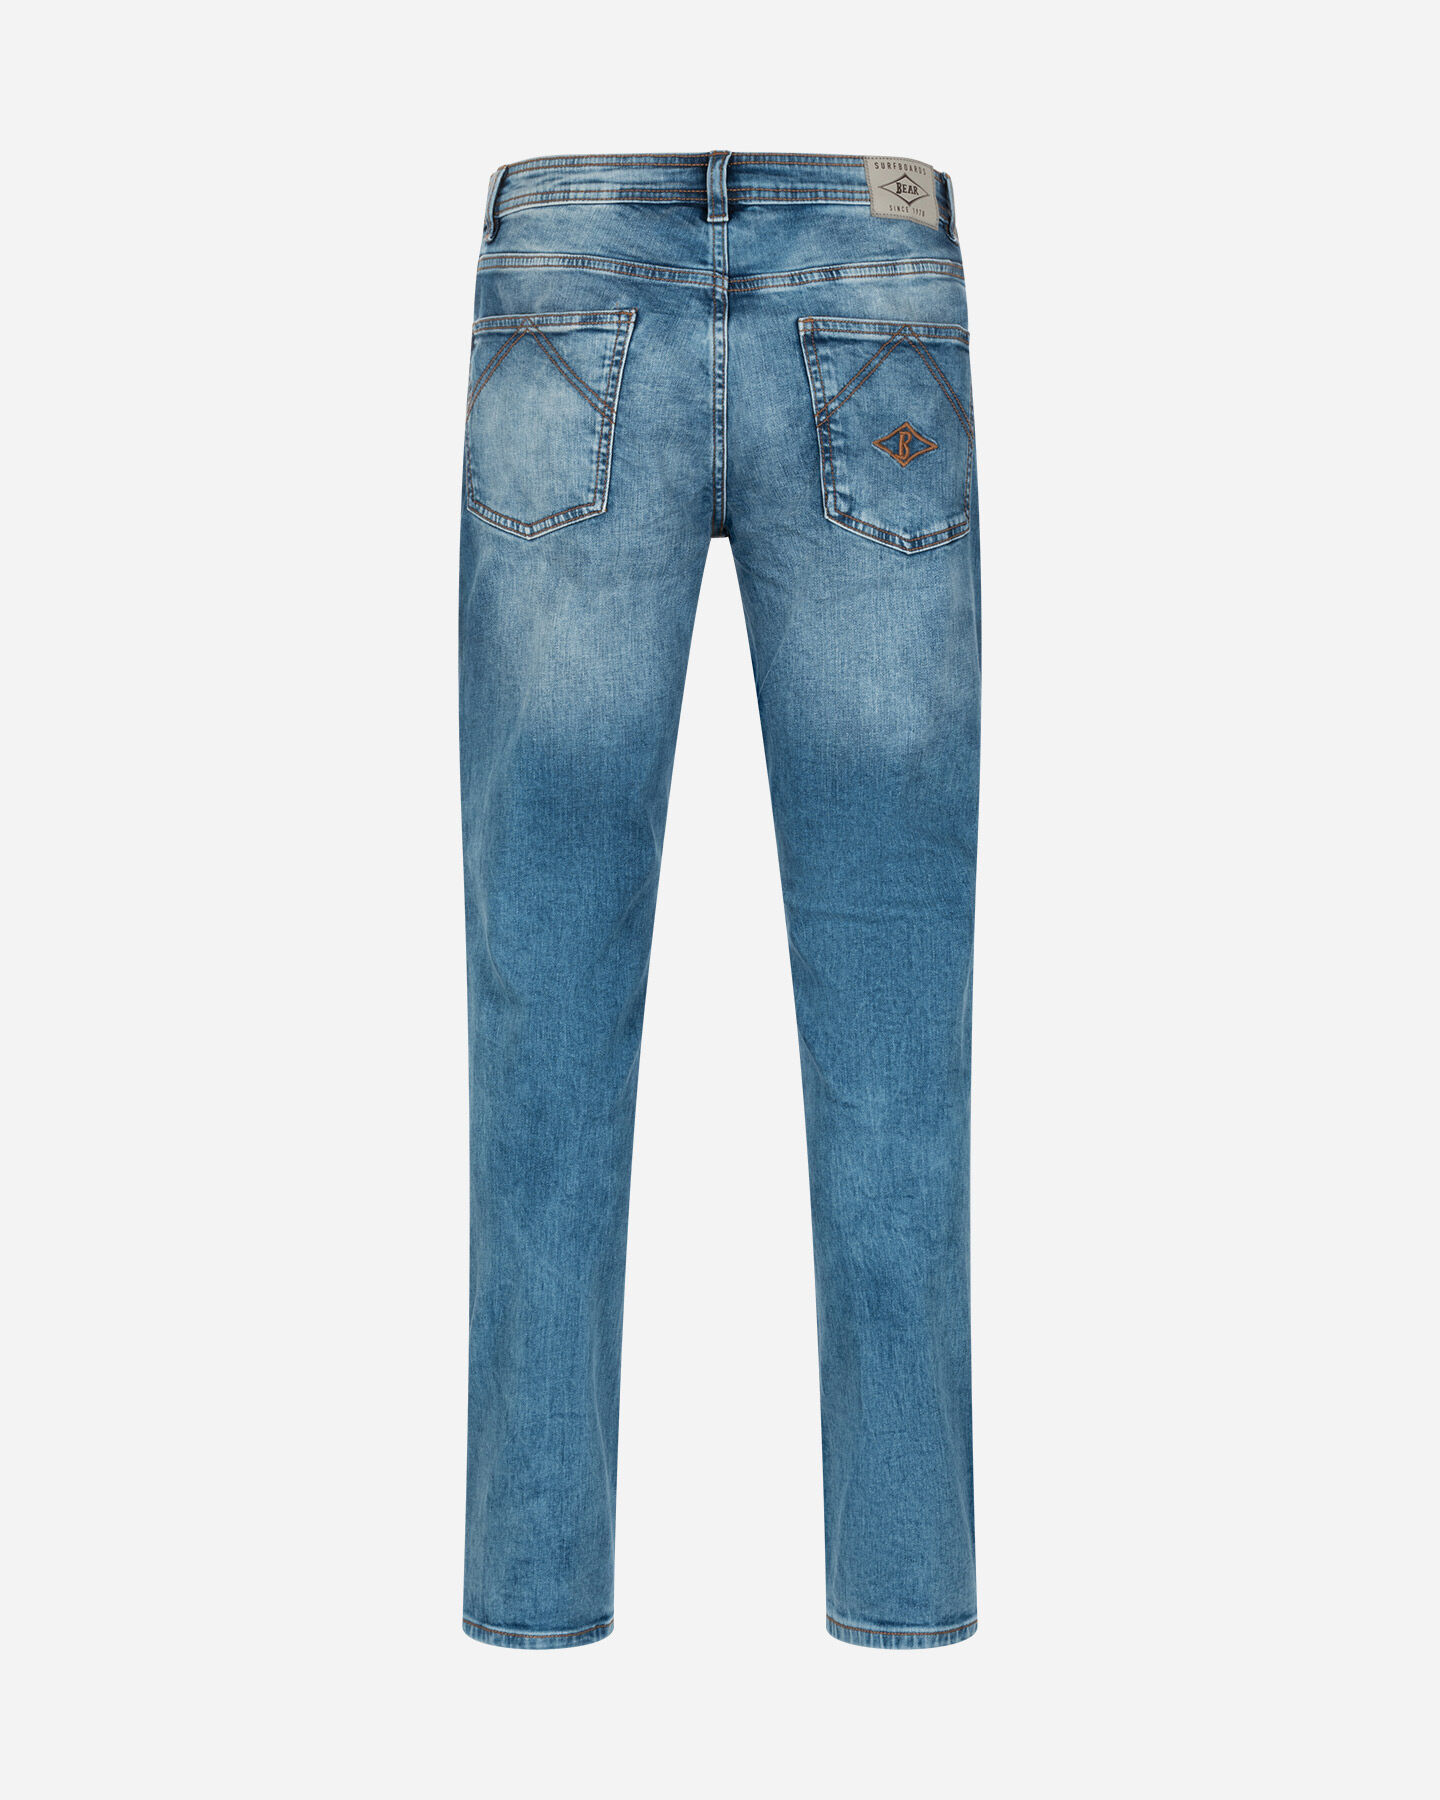  Jeans BEAR HERITAGE M S4131643|MD|44 scatto 1